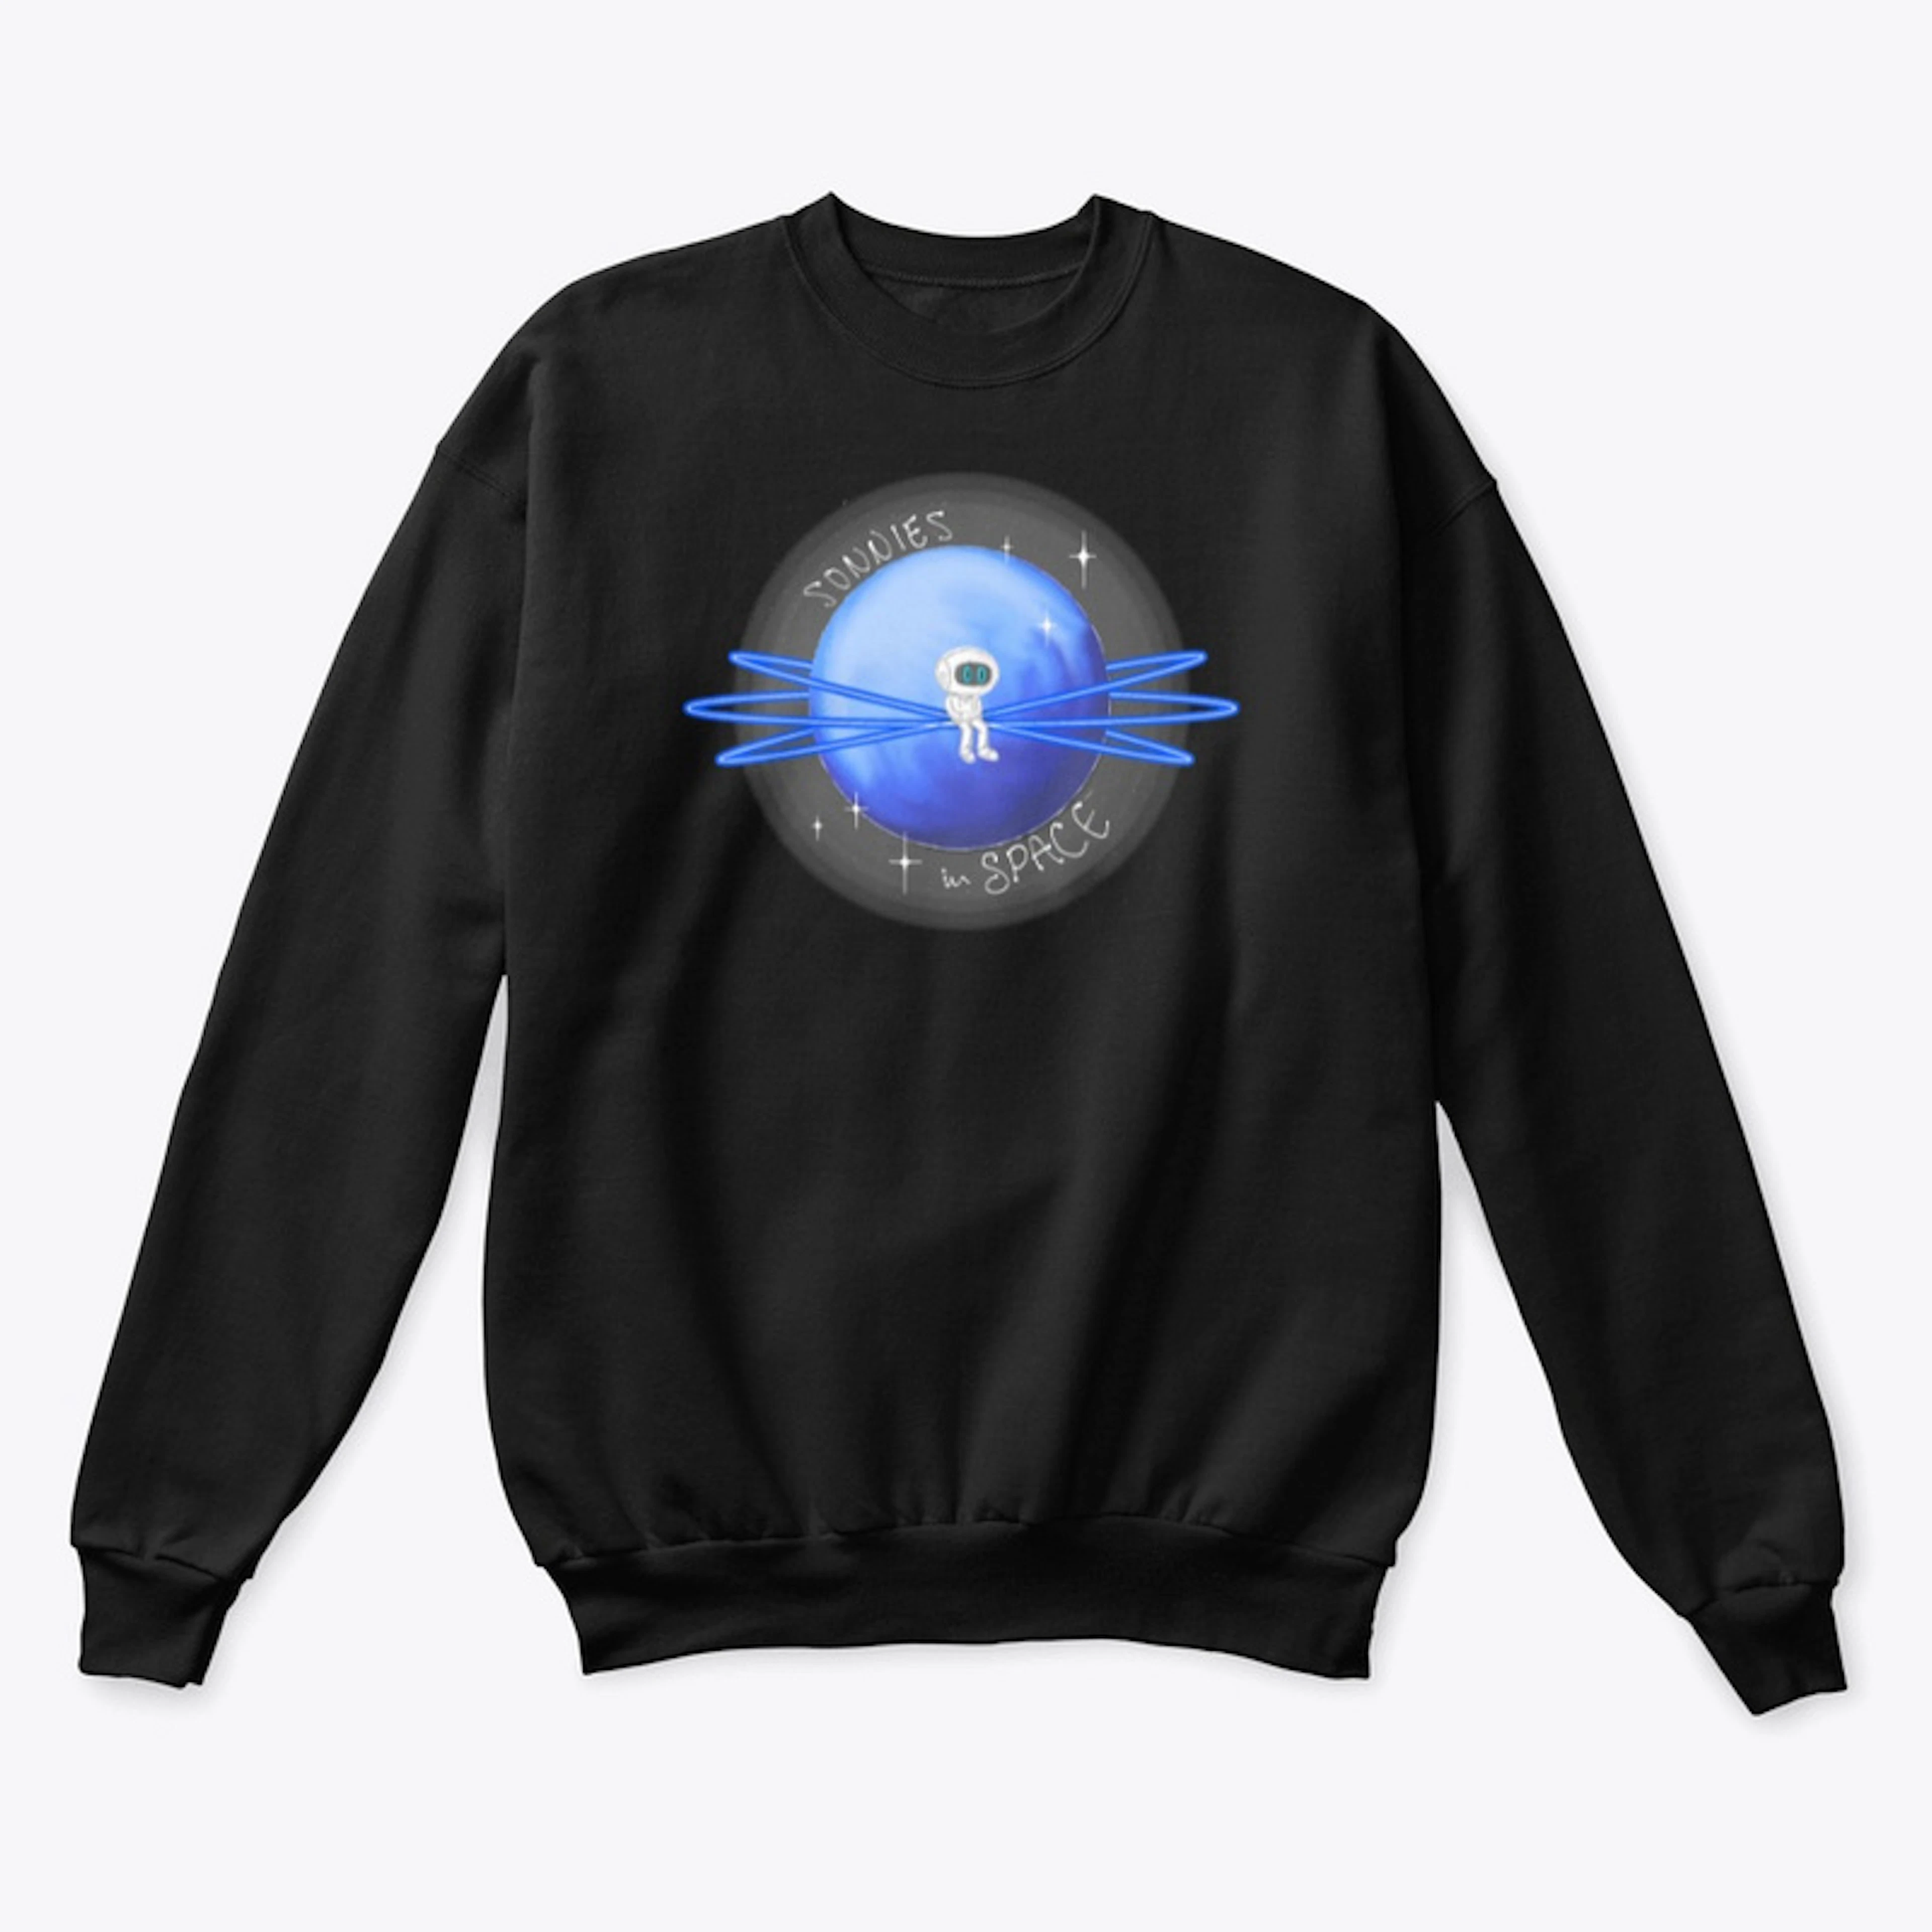 Sonnies In Space logo shirt